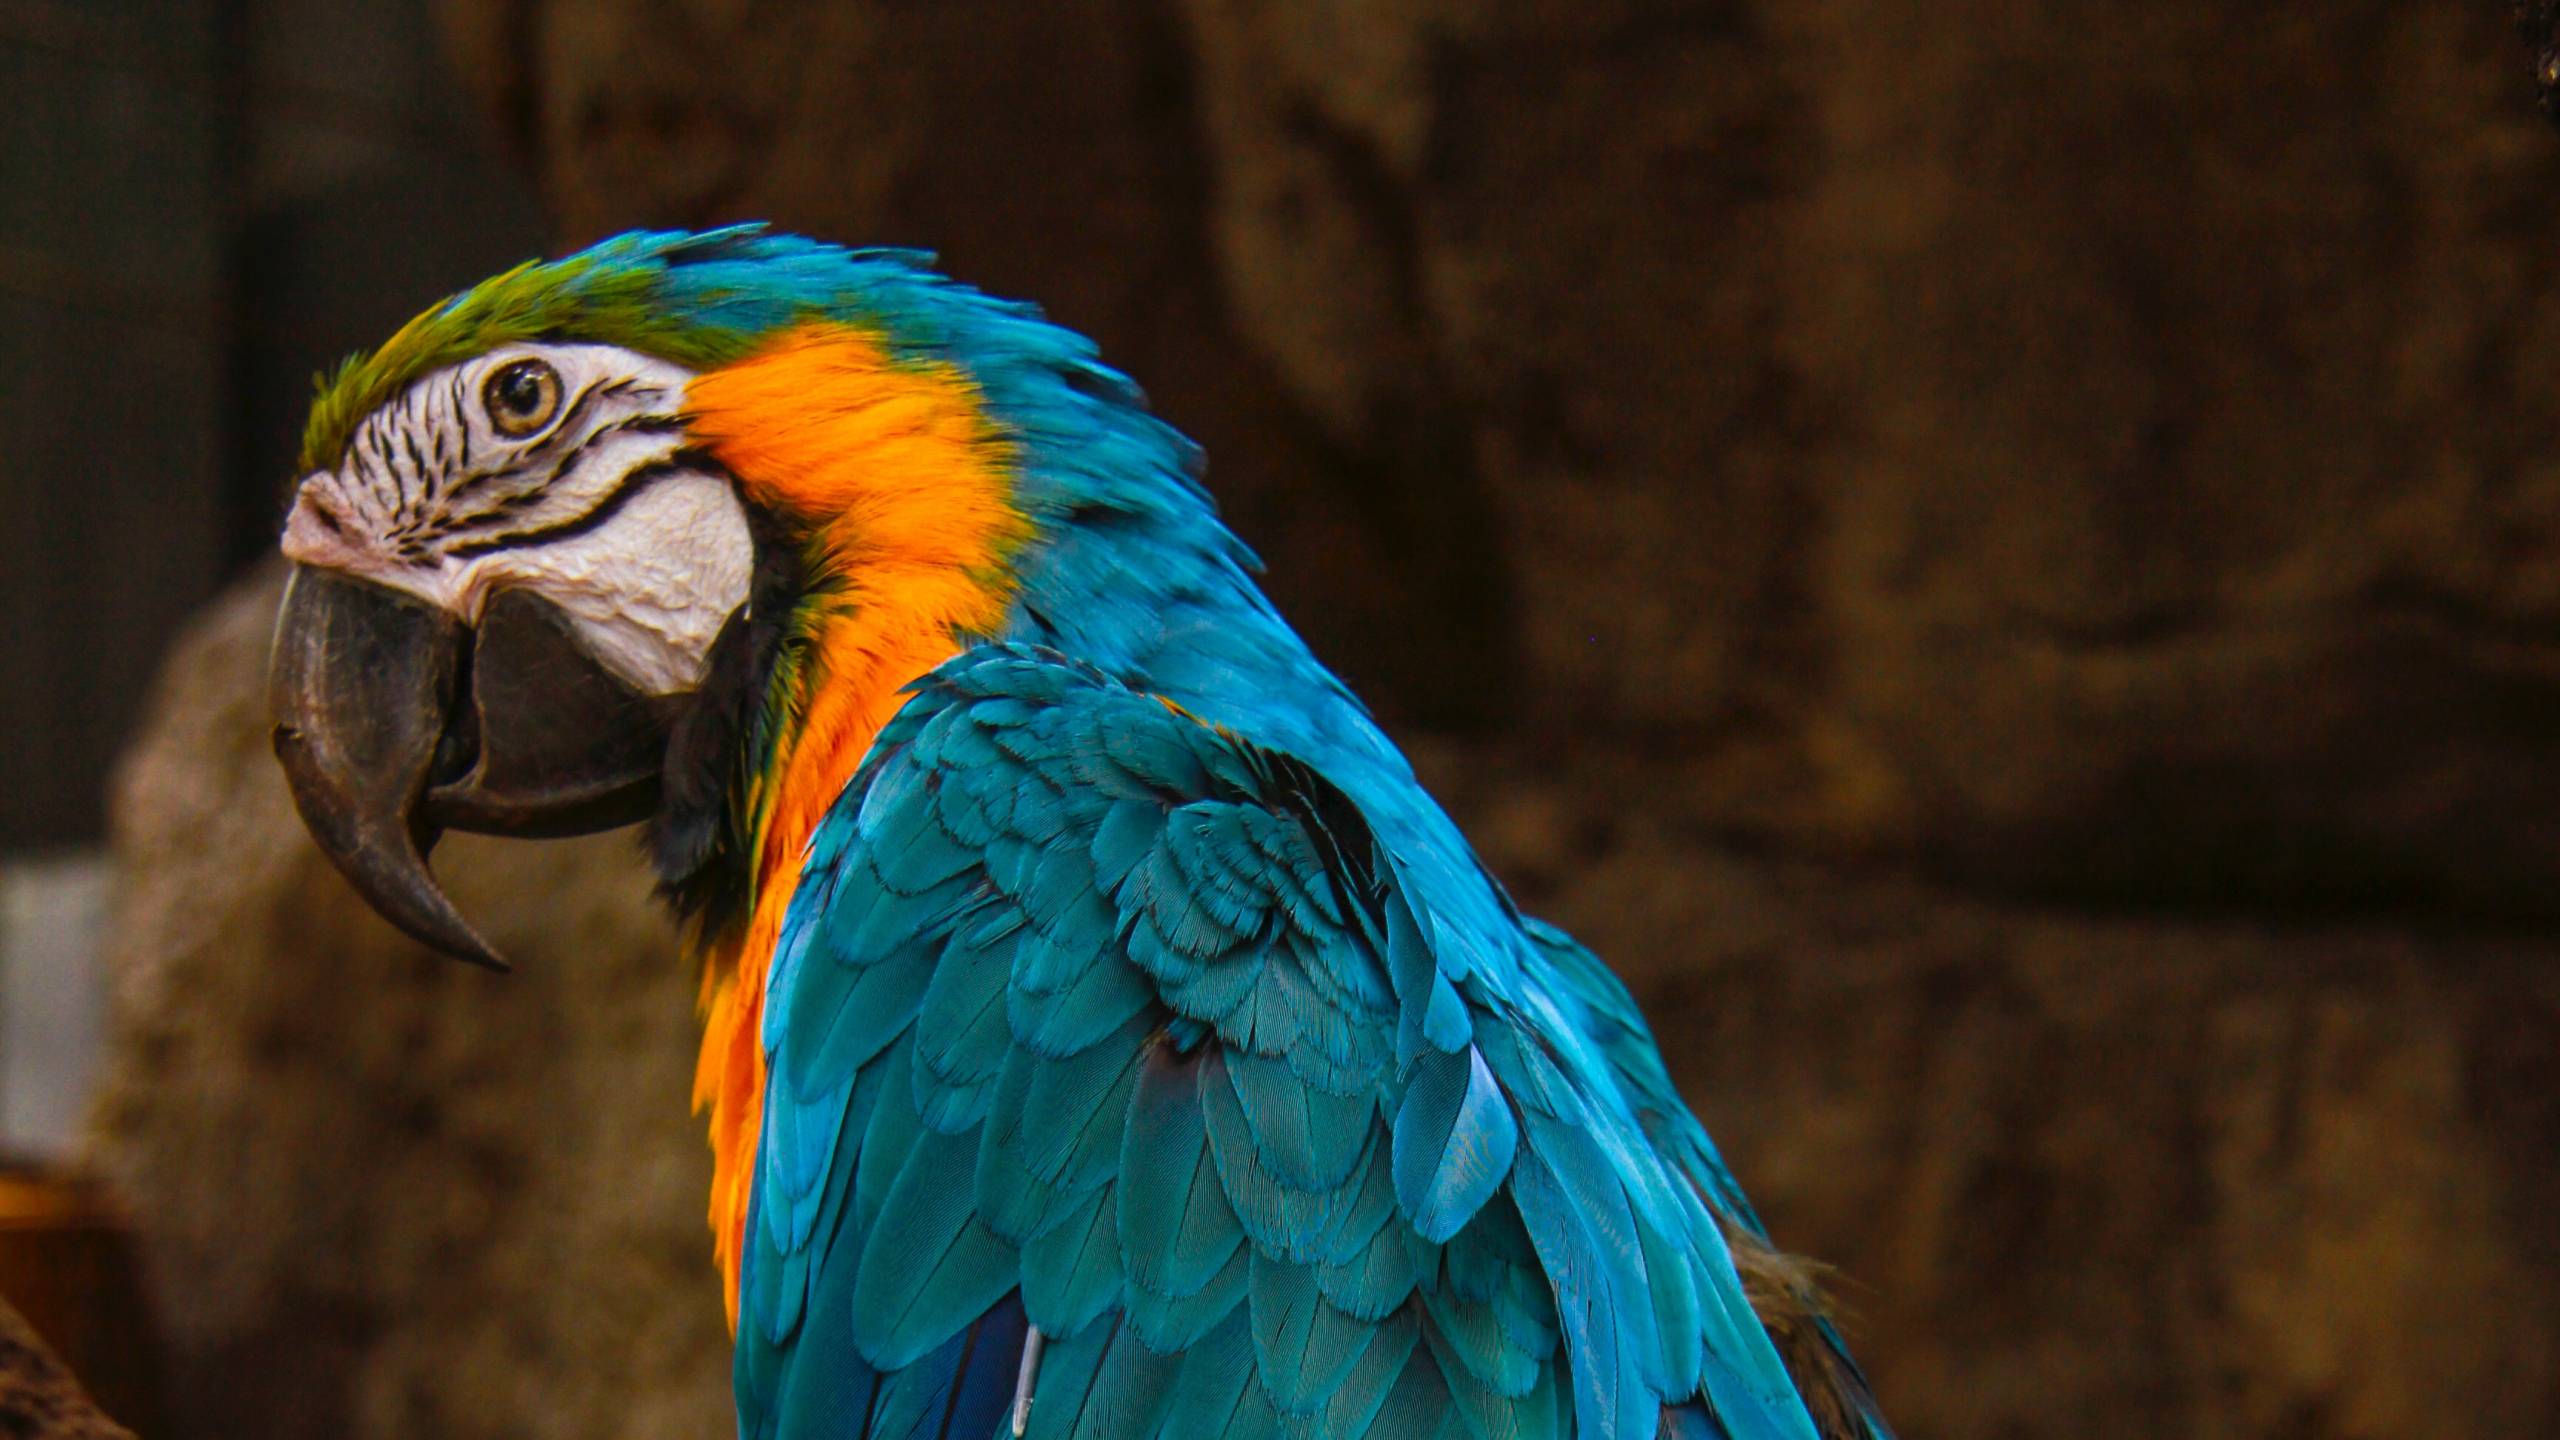 Parrot 4K wallpaper for your desktop or mobile screen free and easy to download